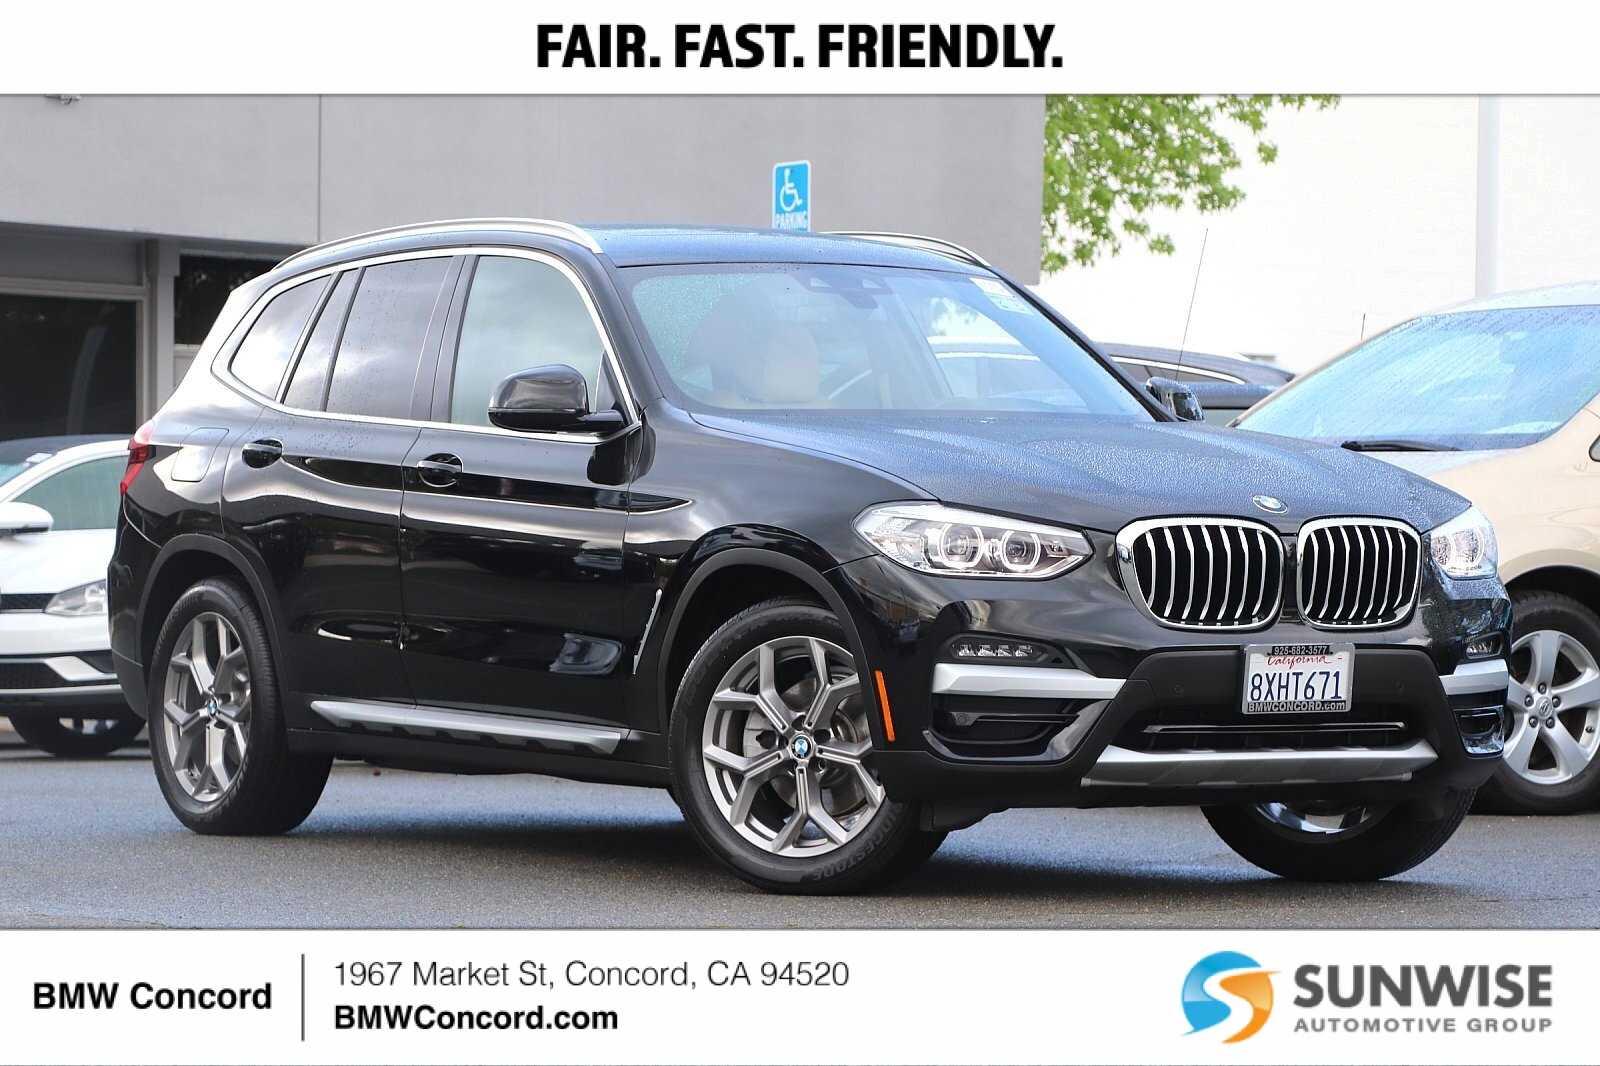 Used Bmw X3 Concord Ca